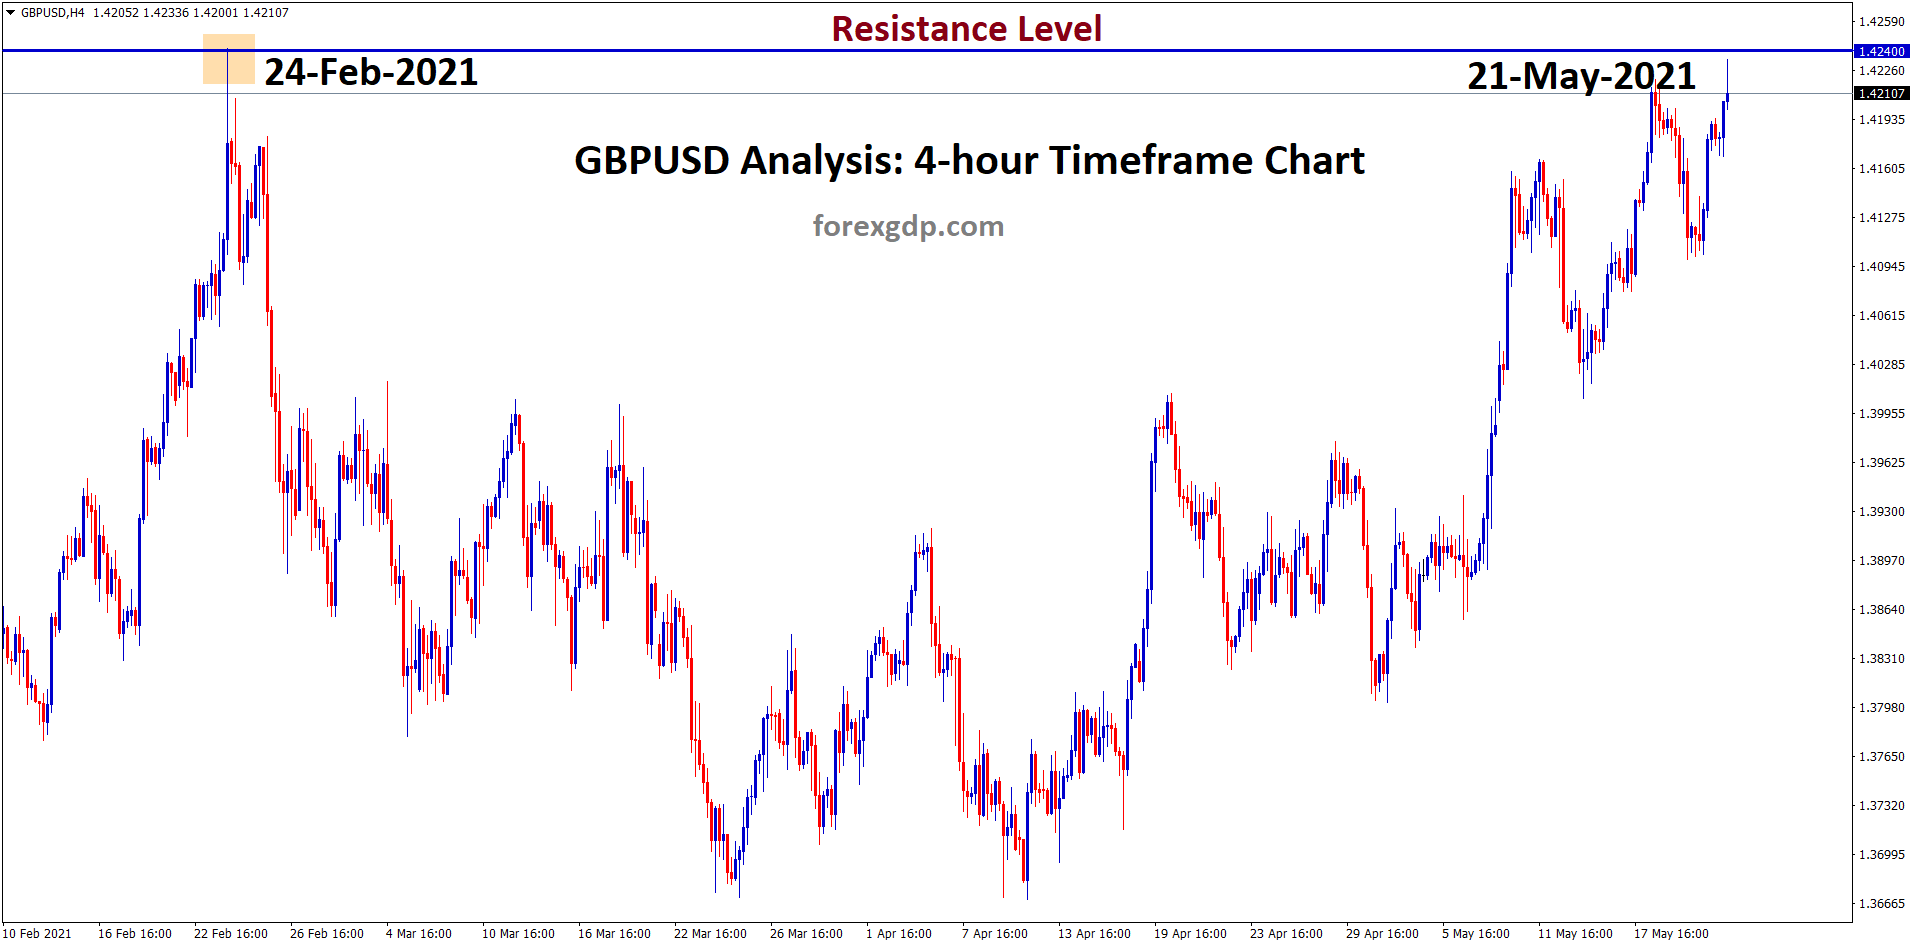 GBPUSD reached the Resistance level after 3 Months